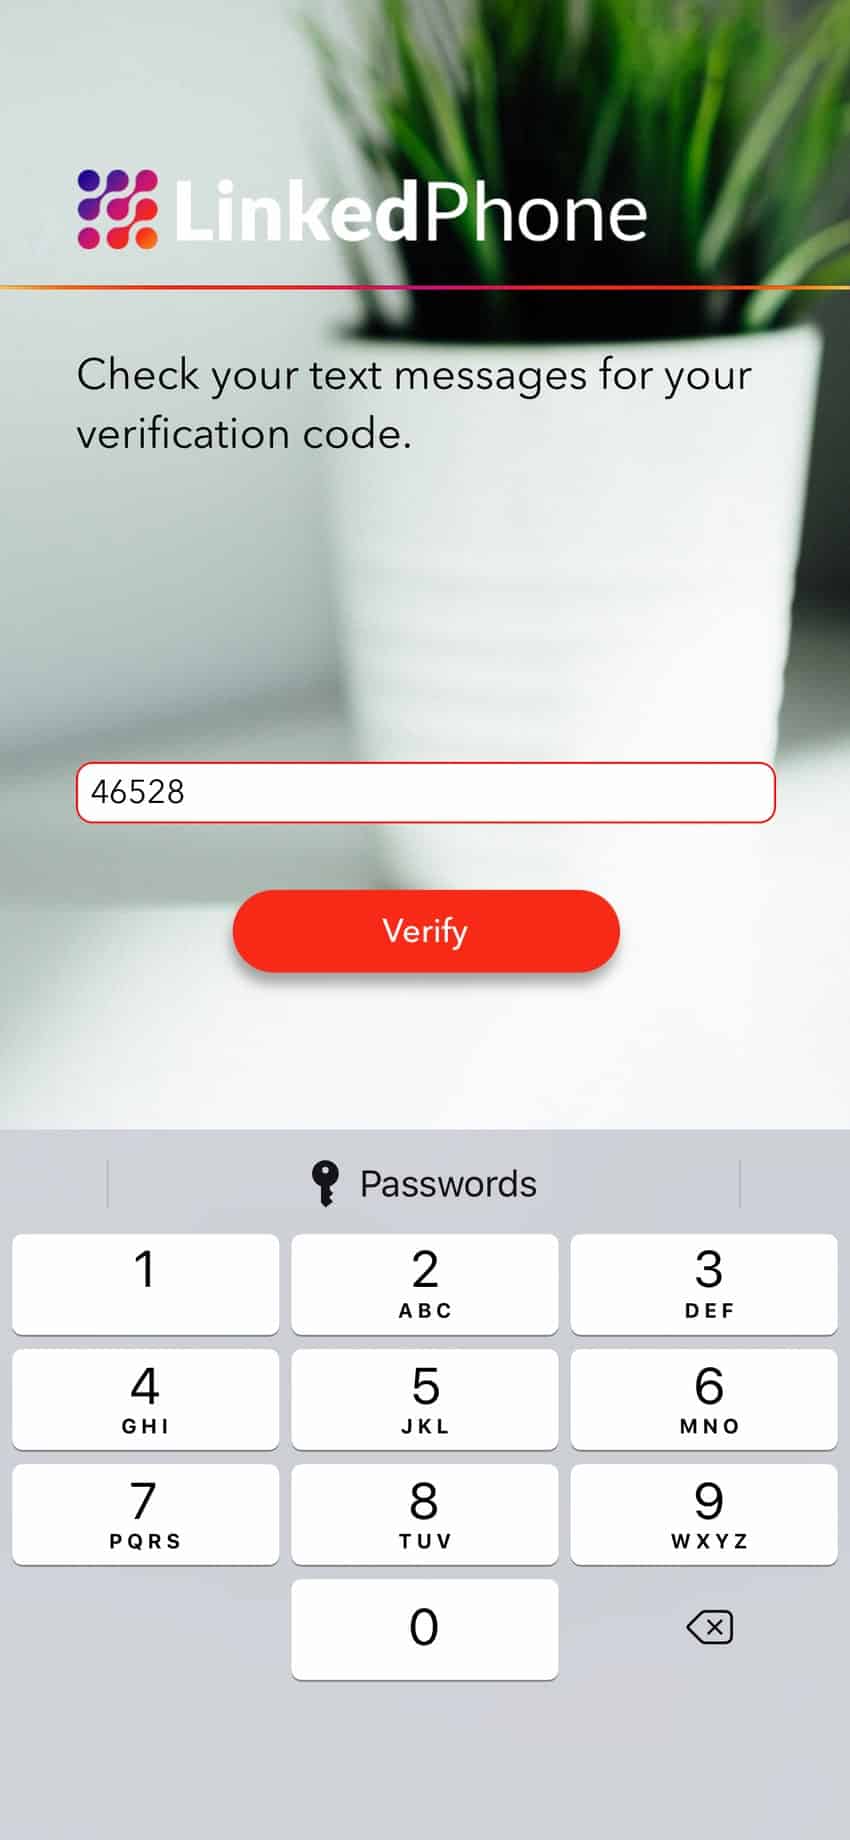 LinkedPhone Mobile App Screenshot - Verification Code to Verify Cell Phone Number